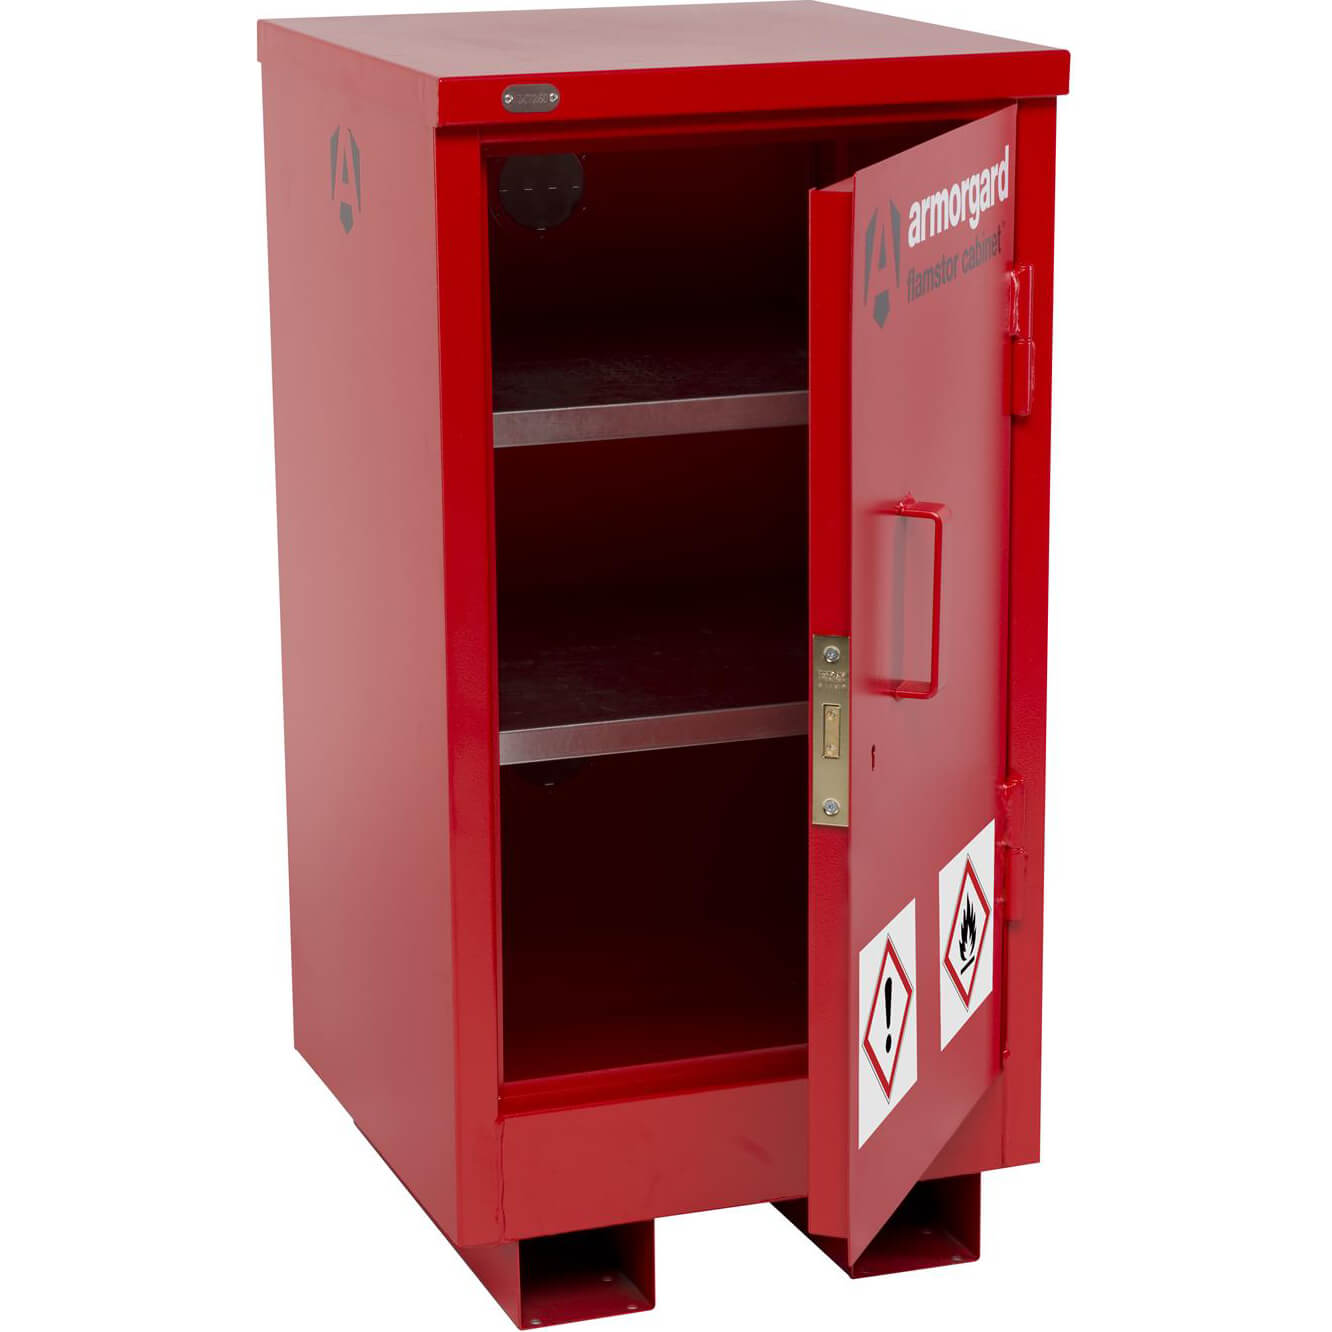 Image of Armorgard Flamstor Chemical and Flammables Hazardous Cabinet 1350mm 780mm 1560mm